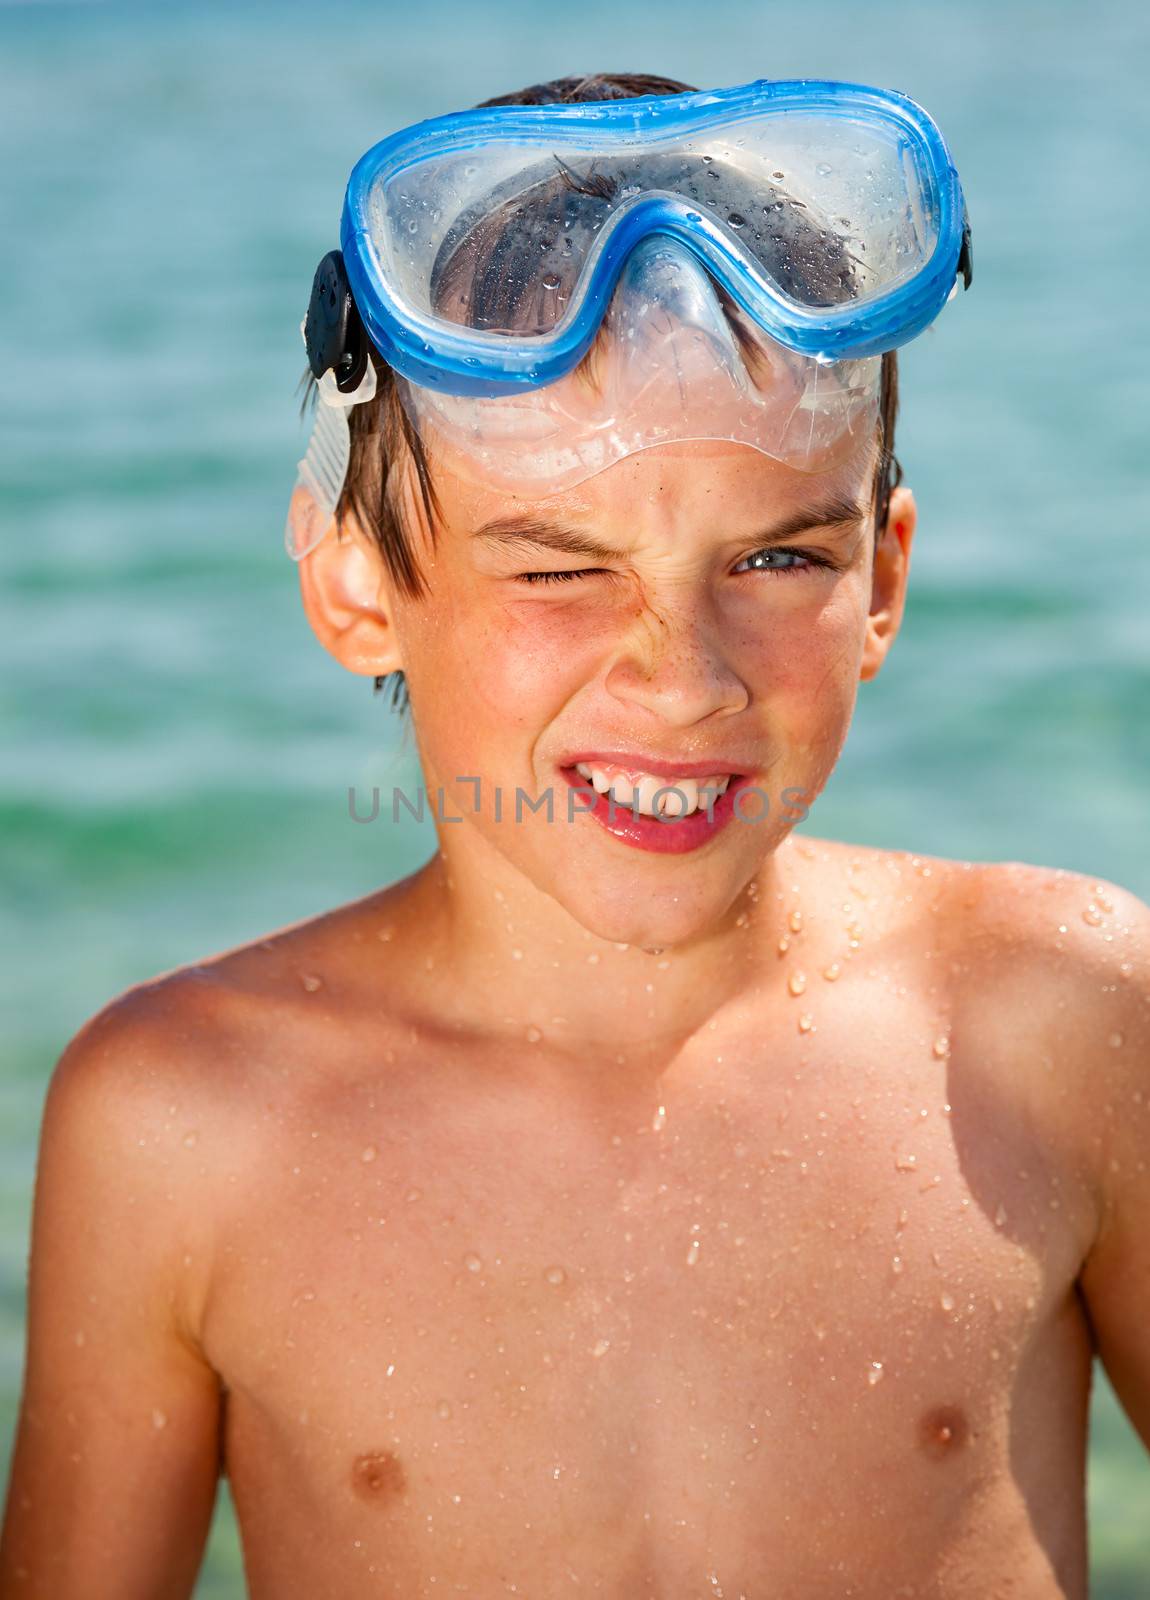 Kid with snorkeling mask portrait